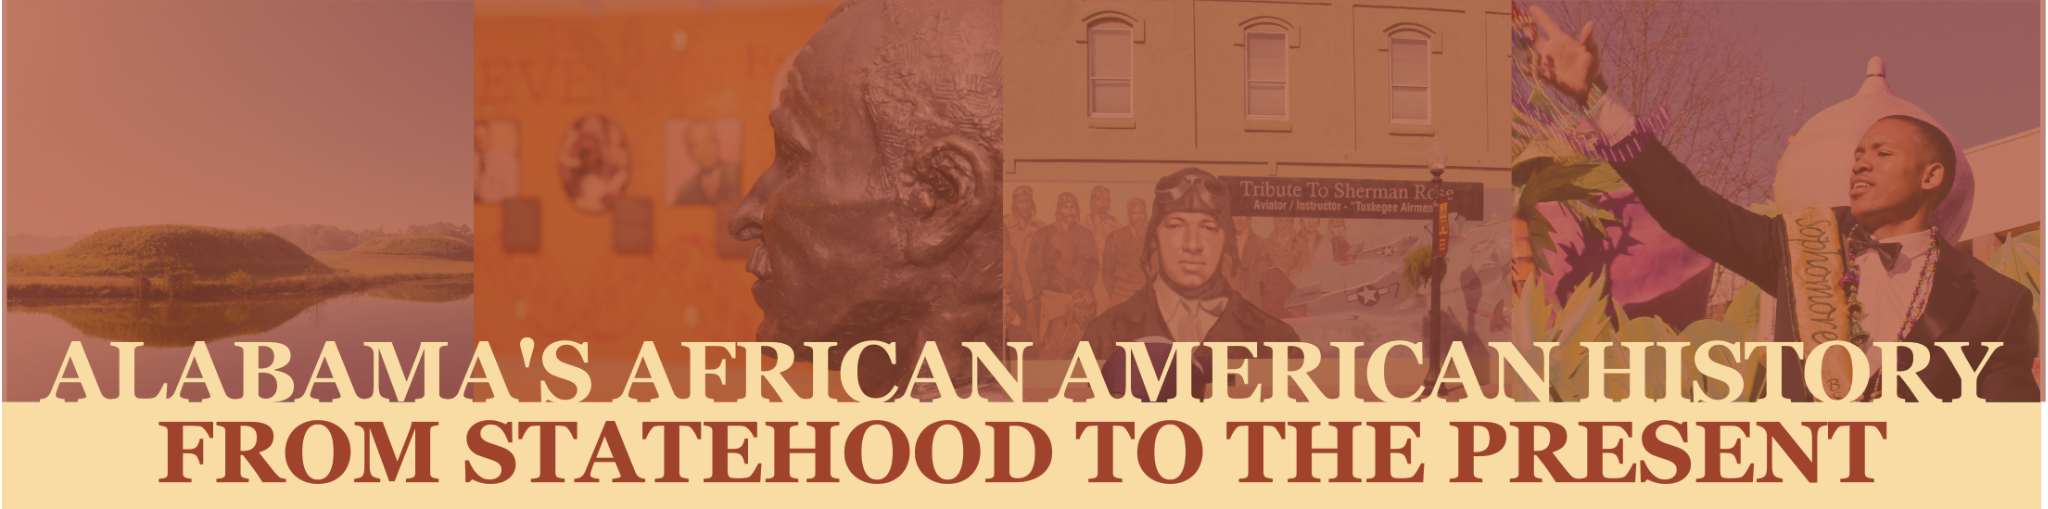 Alabama's African American History from Statehood to Present